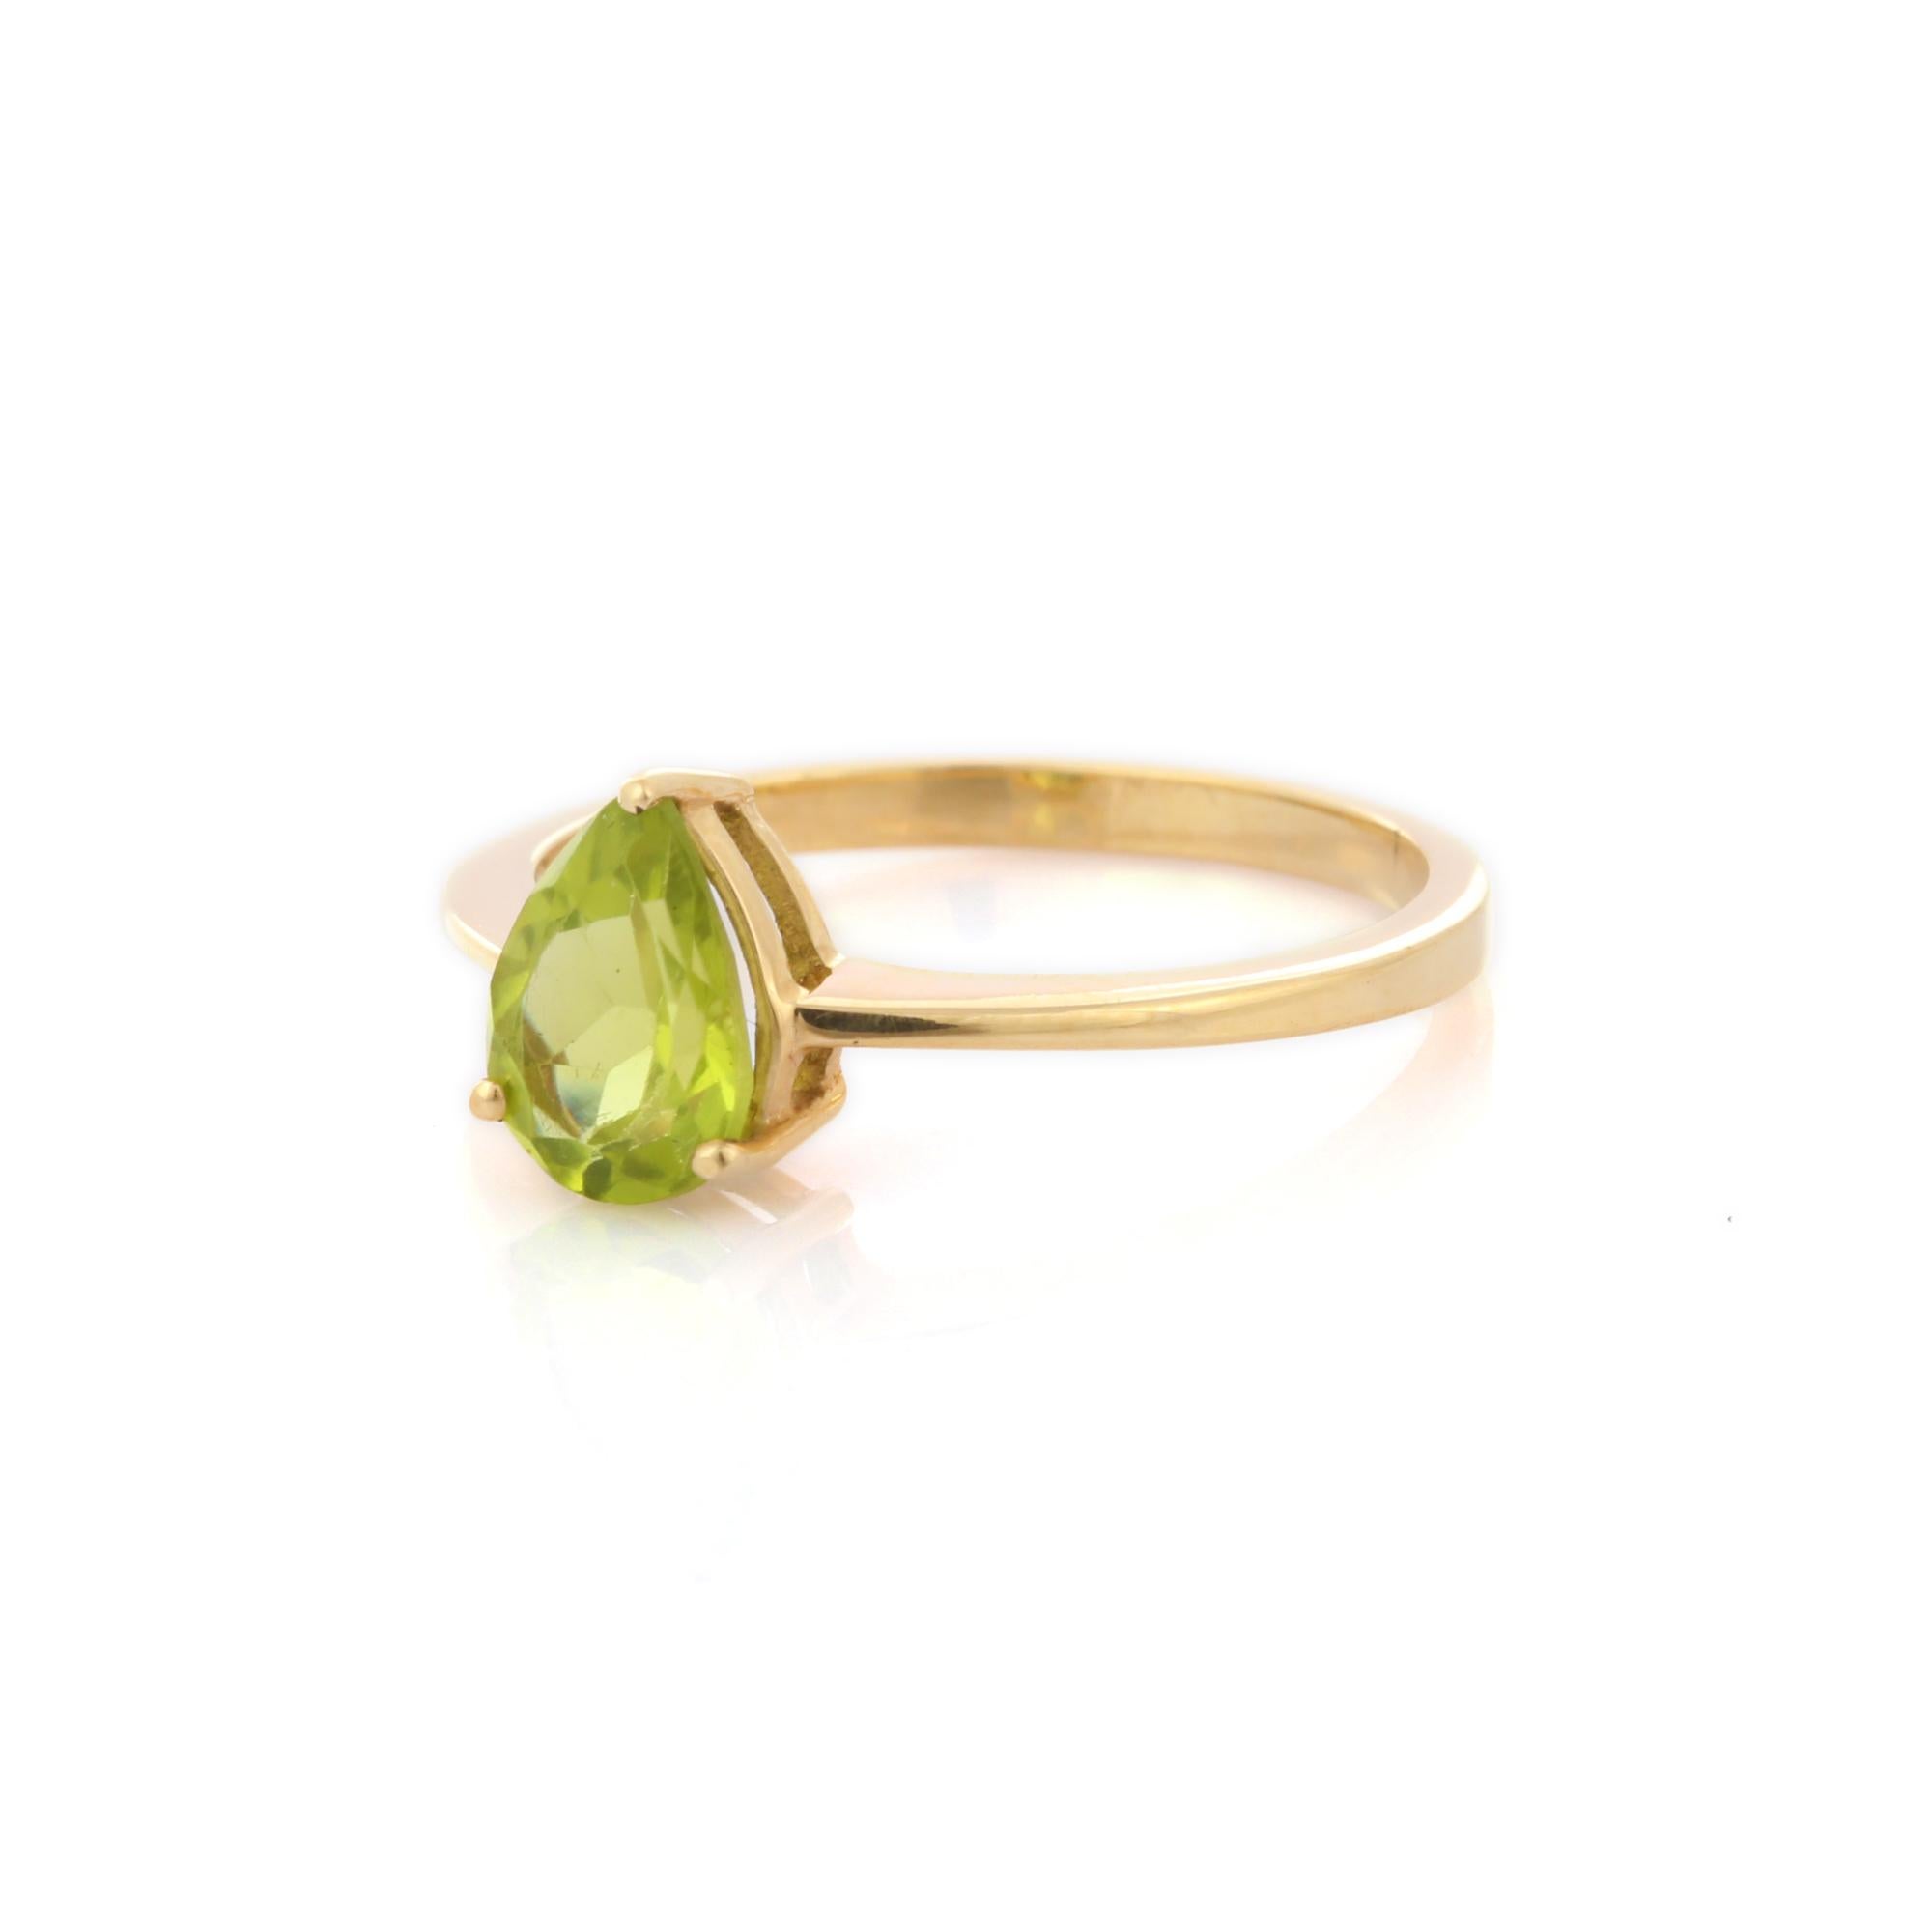 For Sale:  Pear Cut Peridot Solitaire Ring in 14K Yellow Gold 9